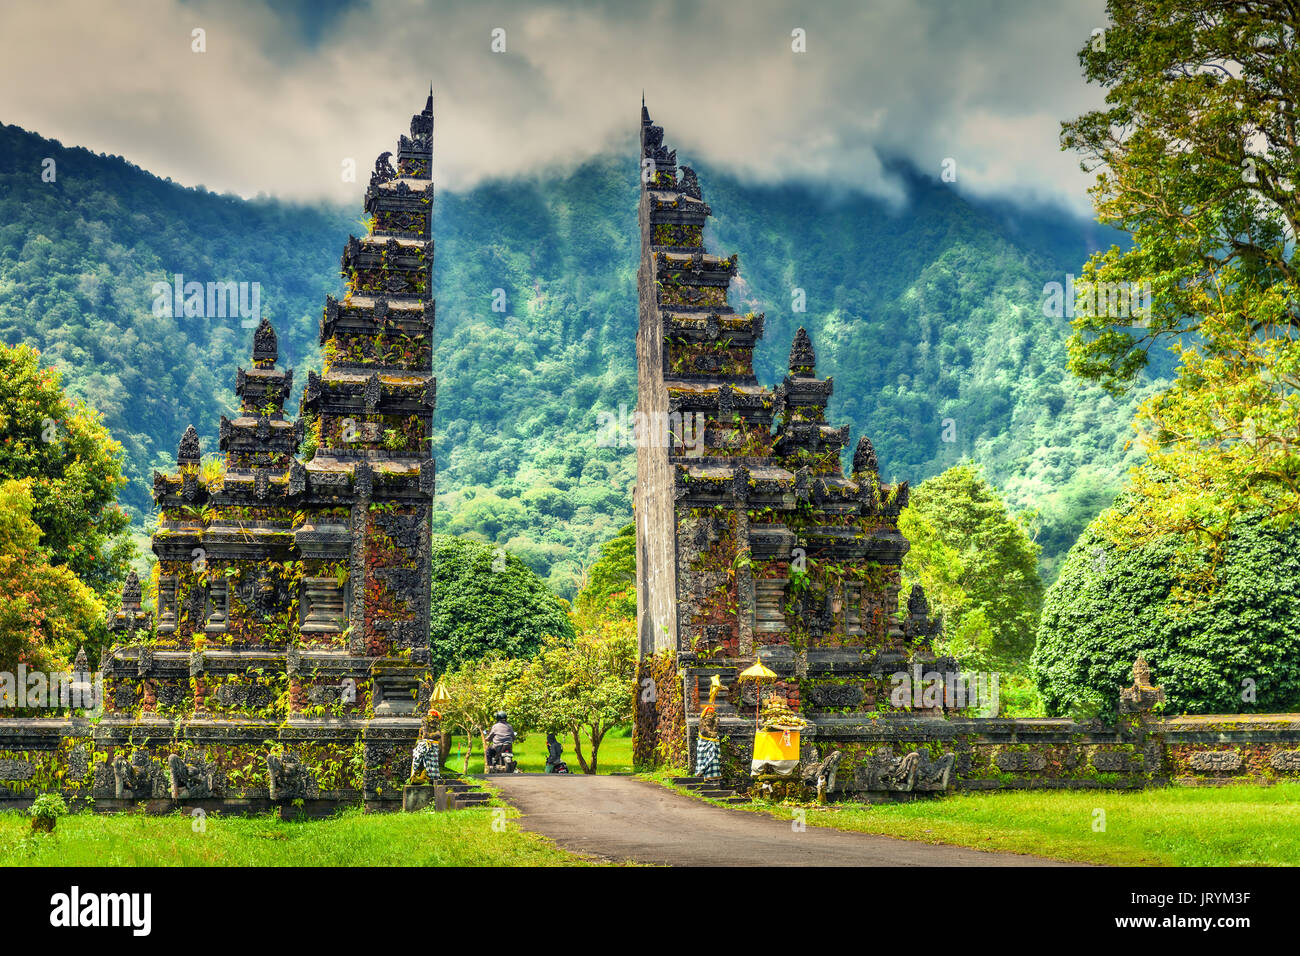 Entrance to the Hindu temple. Bali, Indonesia Stock Photo - Alamy